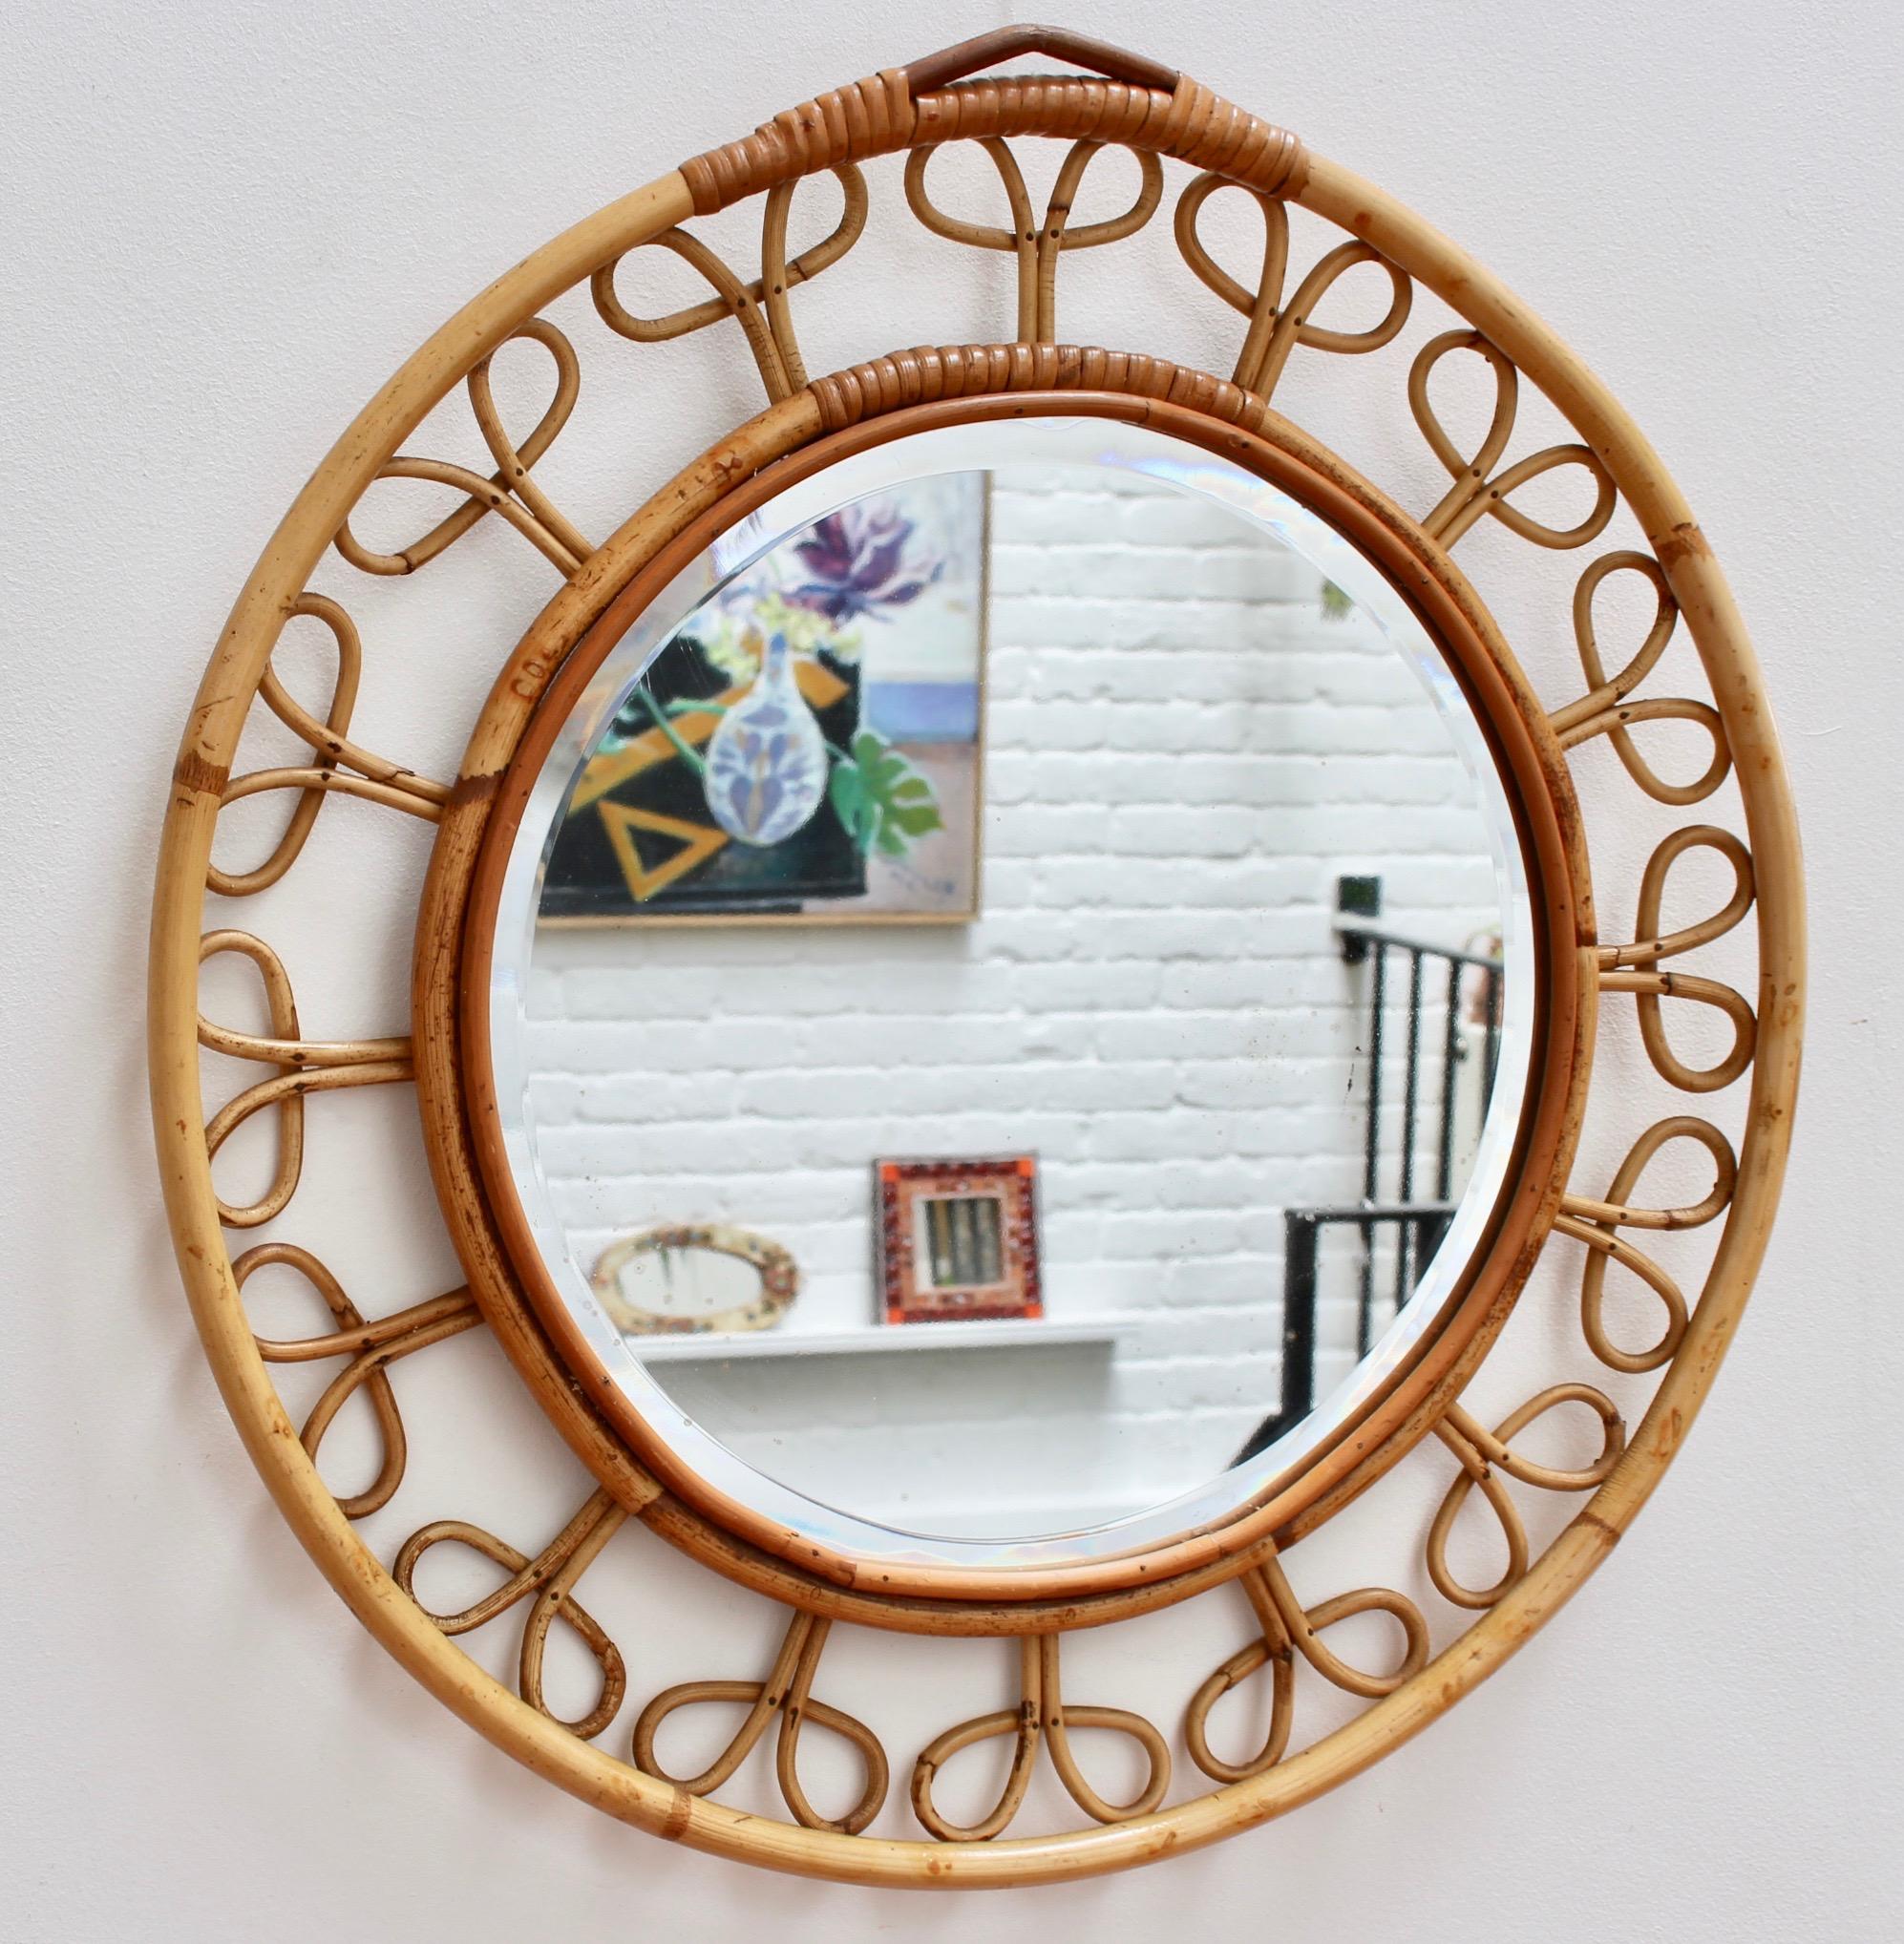 Midcentury French rattan round wall mirror (circa 1960s). This vintage mirror is formed by two concentric circles framing the glass. They are connected by sixteen rattan flower motif designs creating a chic and appealing piece. This is a very rare